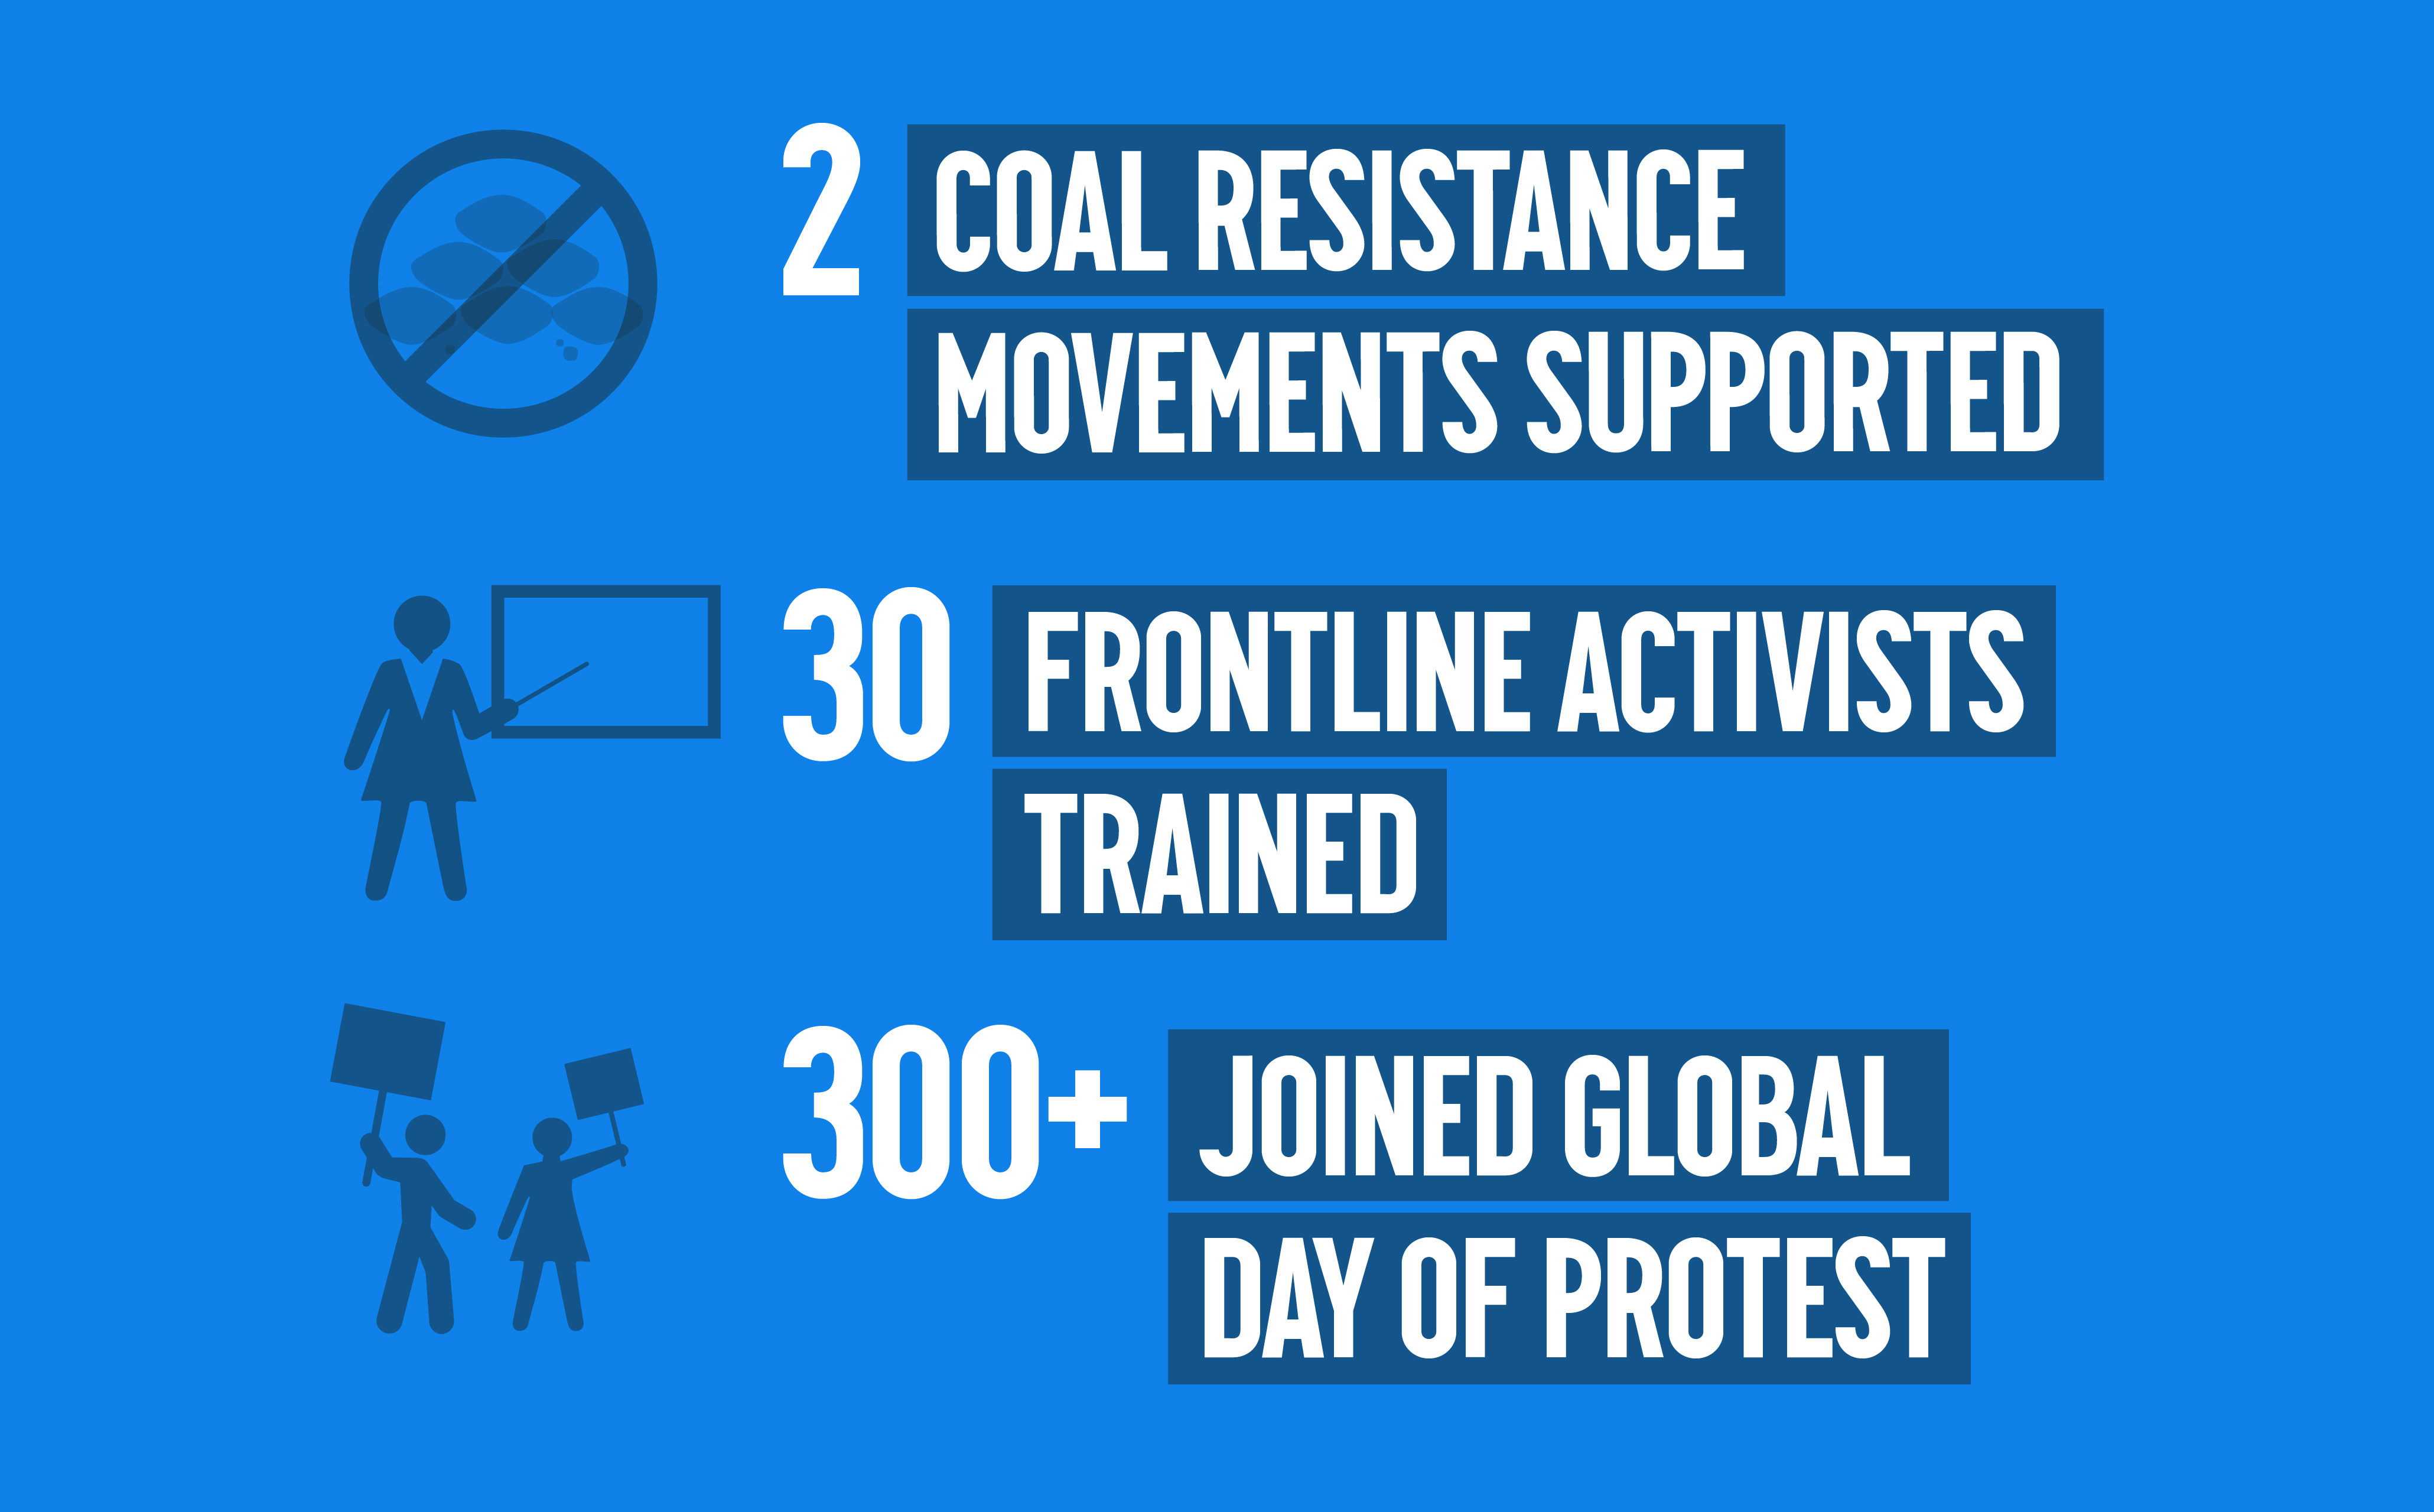 2 coal resistance movements supported, 30 frontline activists trained, 300+ joined Global Day of Protest